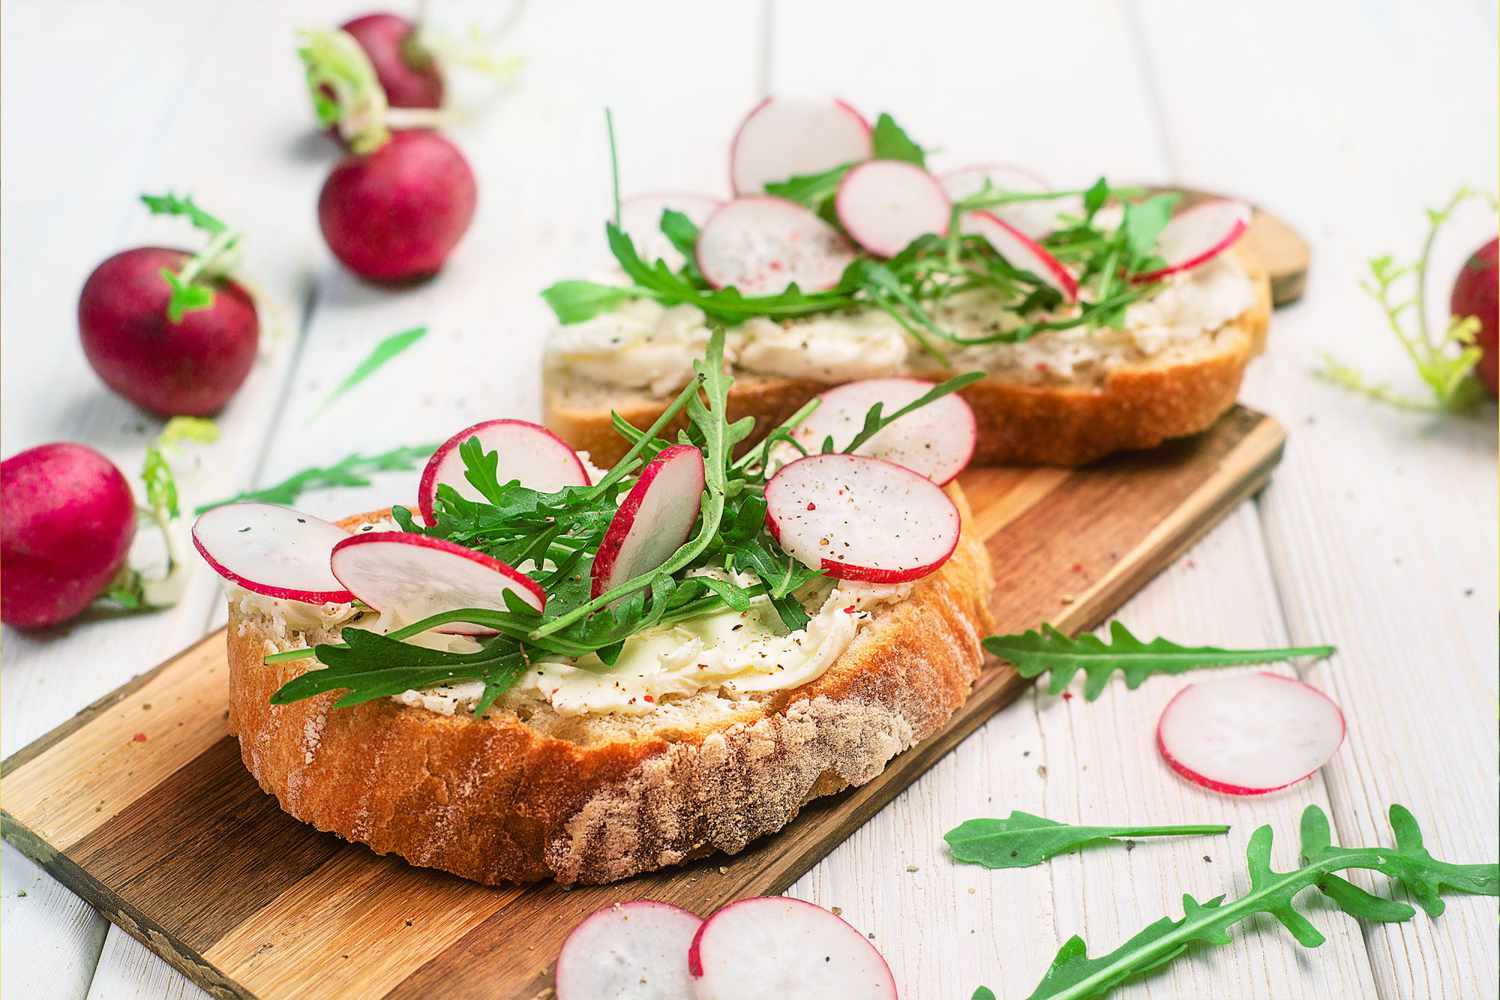 Toast topped with radish slices and arugula sitting on table with radishes